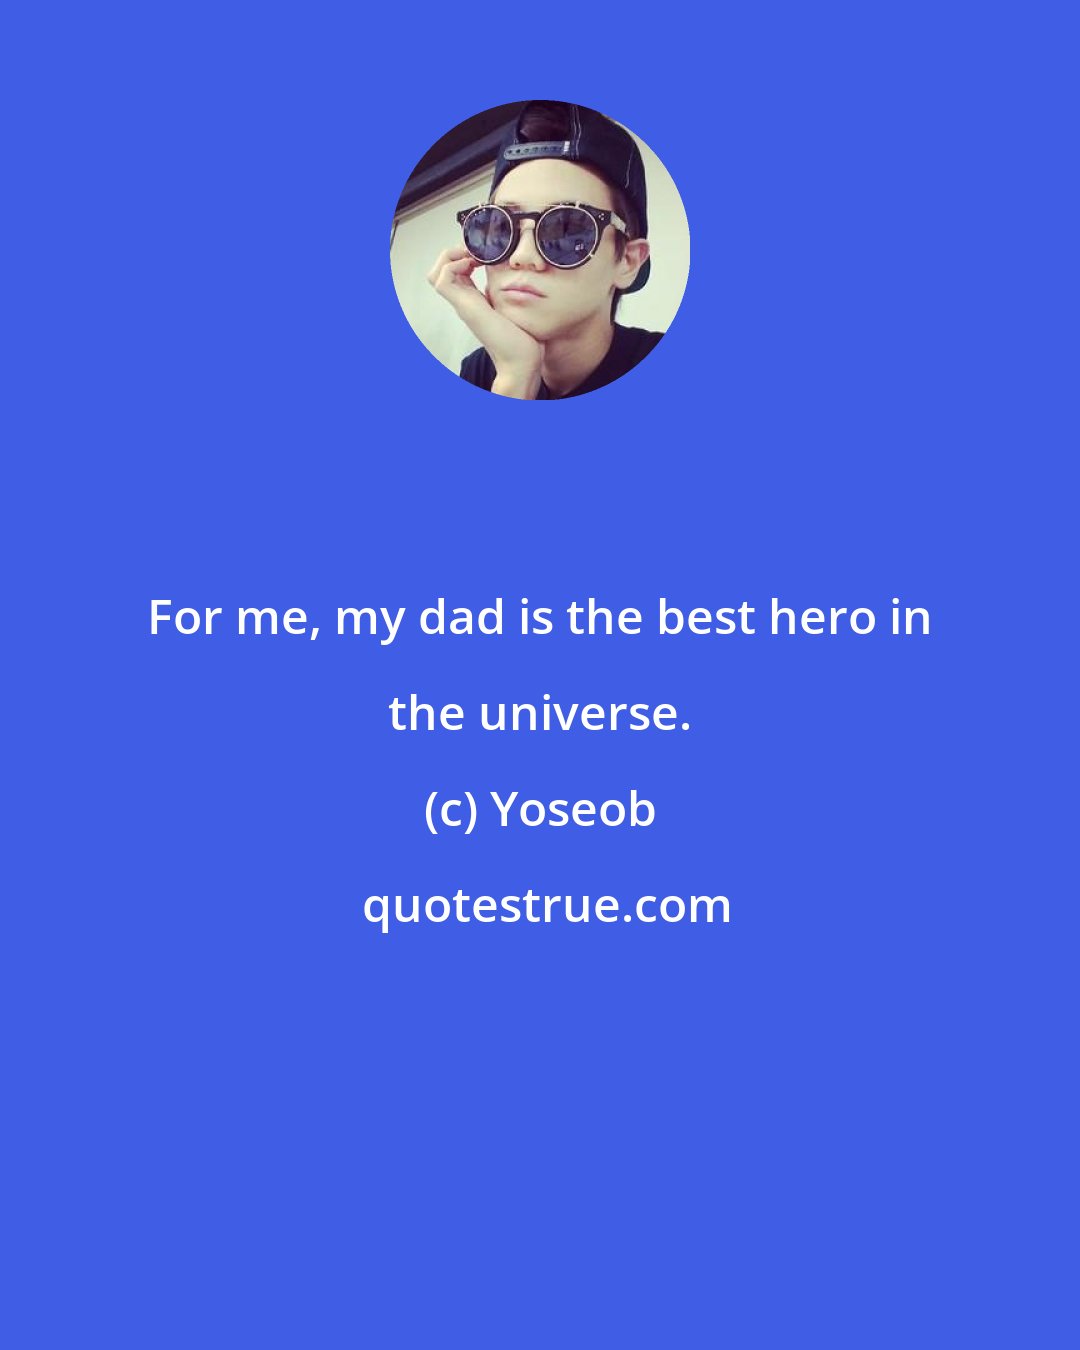 Yoseob: For me, my dad is the best hero in the universe.